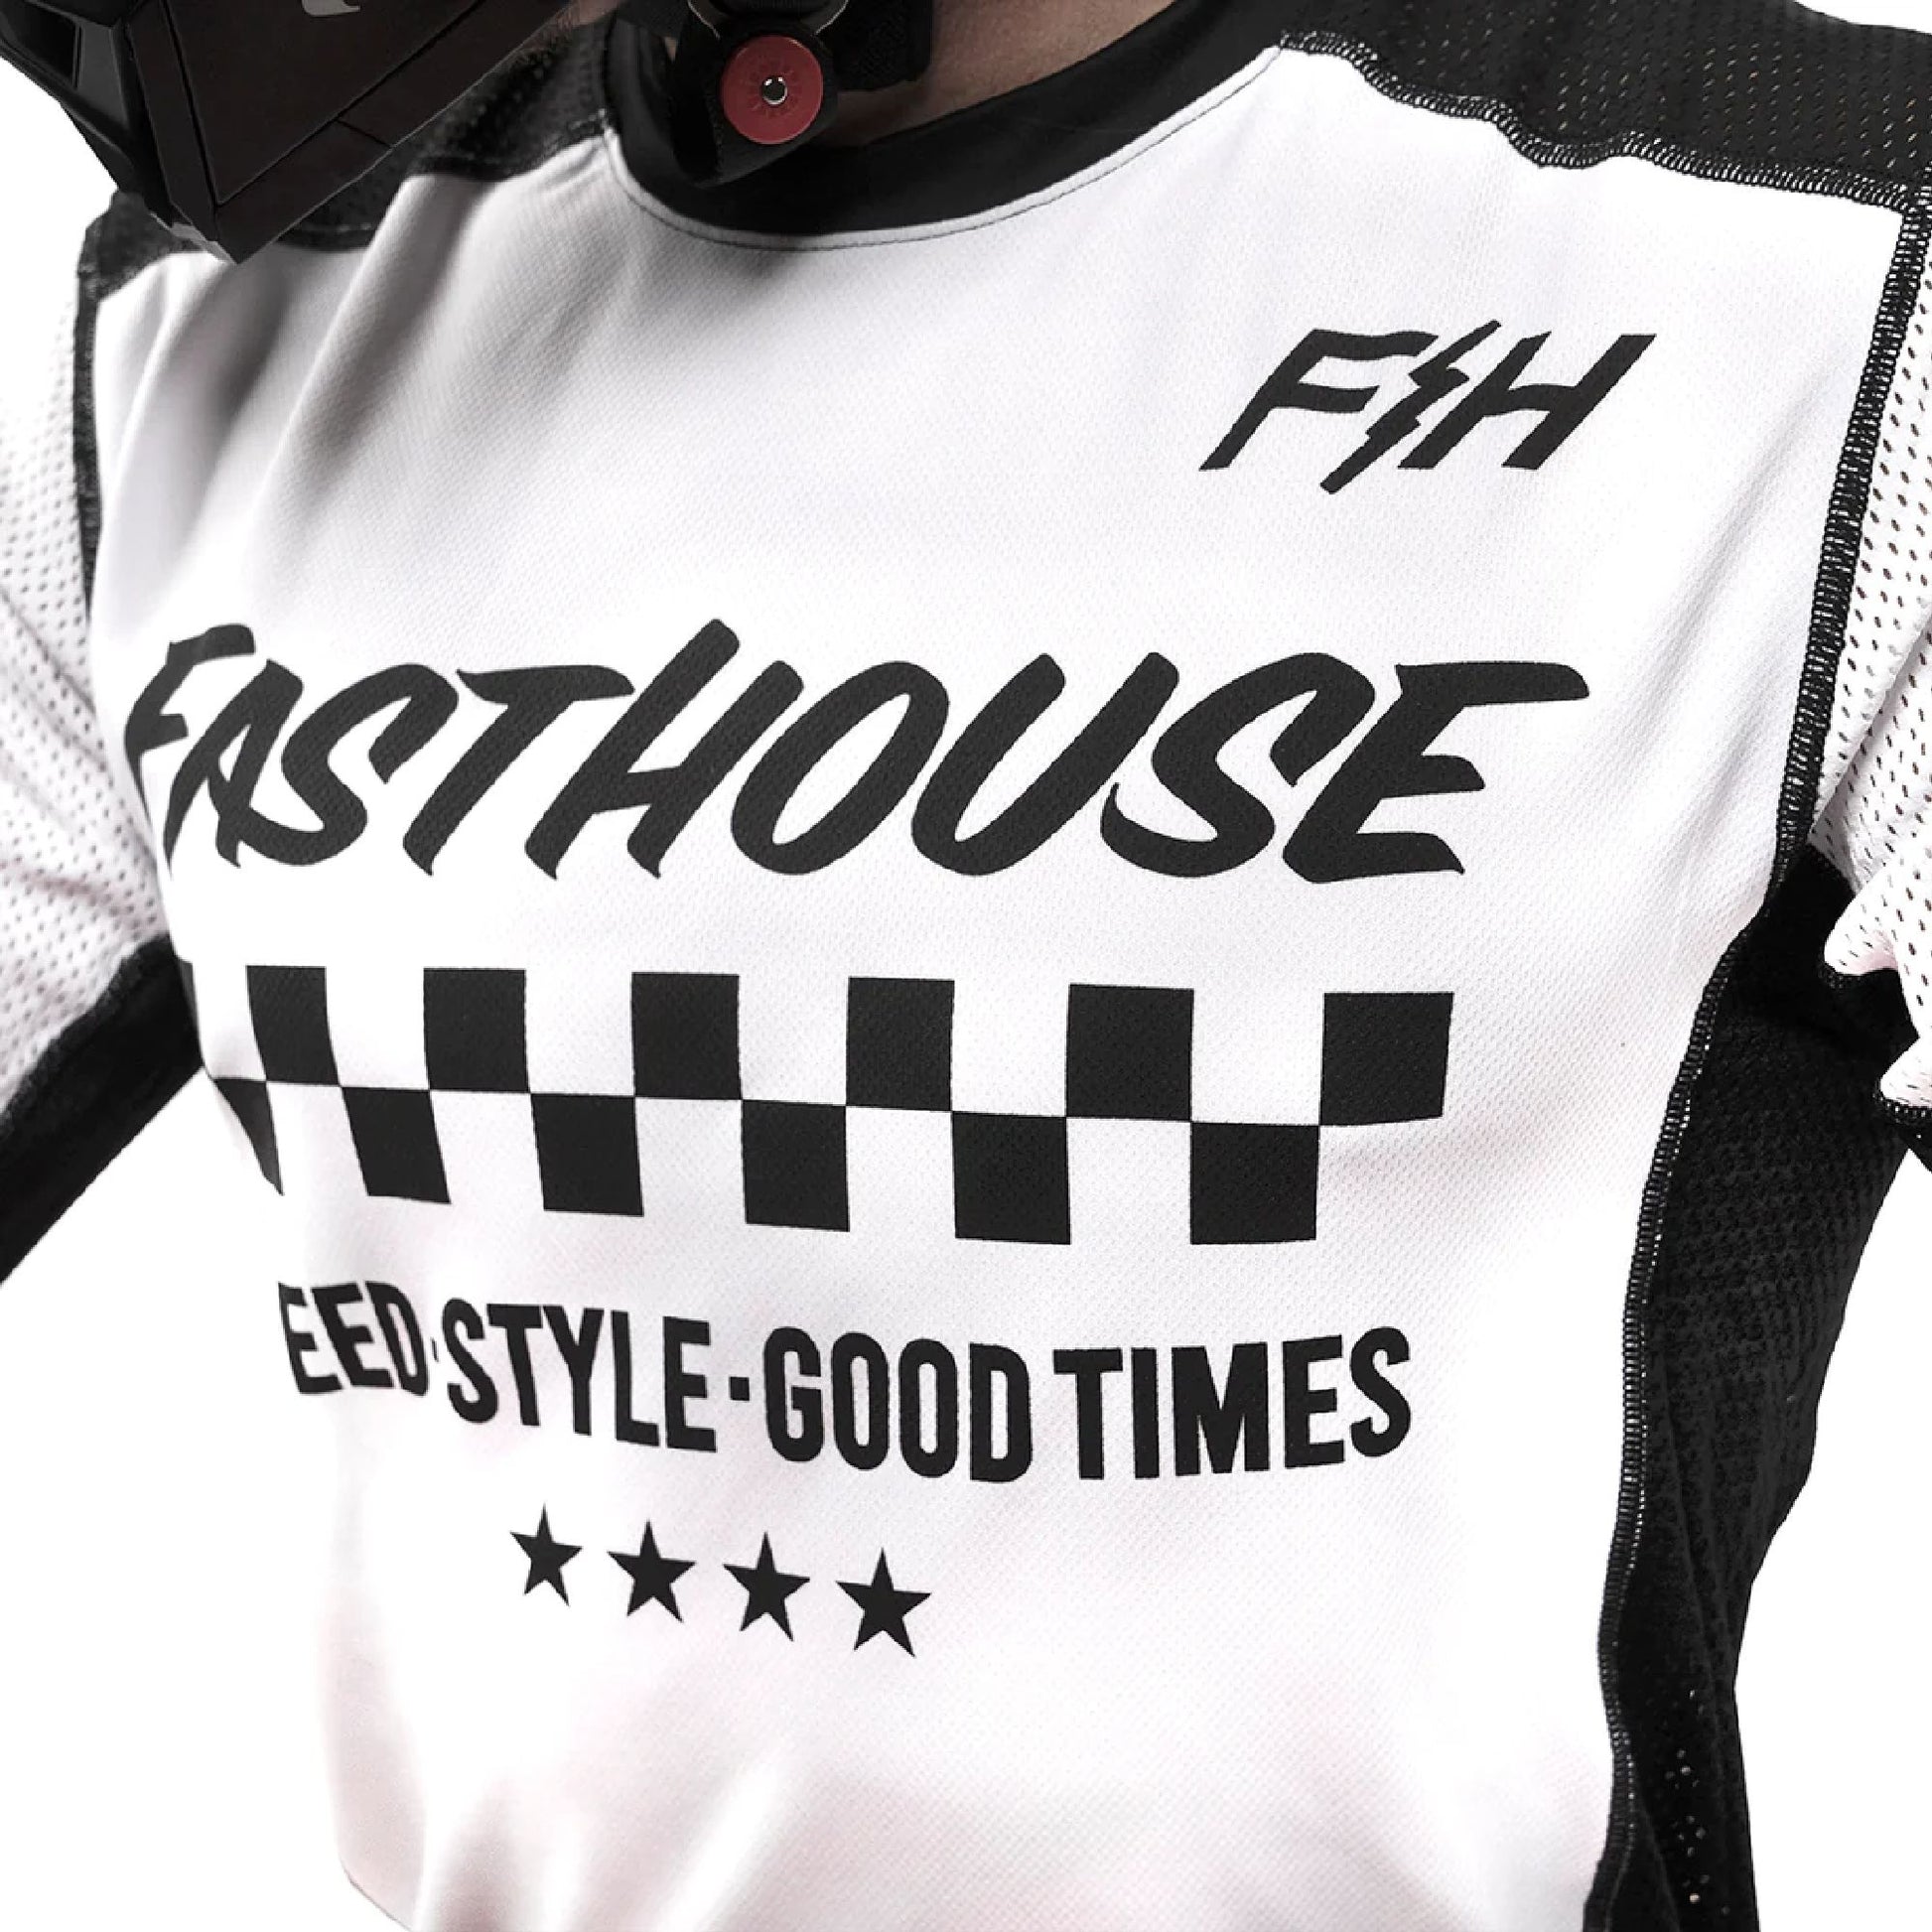 Fasthouse Youth USA Originals Air Cooled Jersey White Black - Fasthouse Bike Jerseys